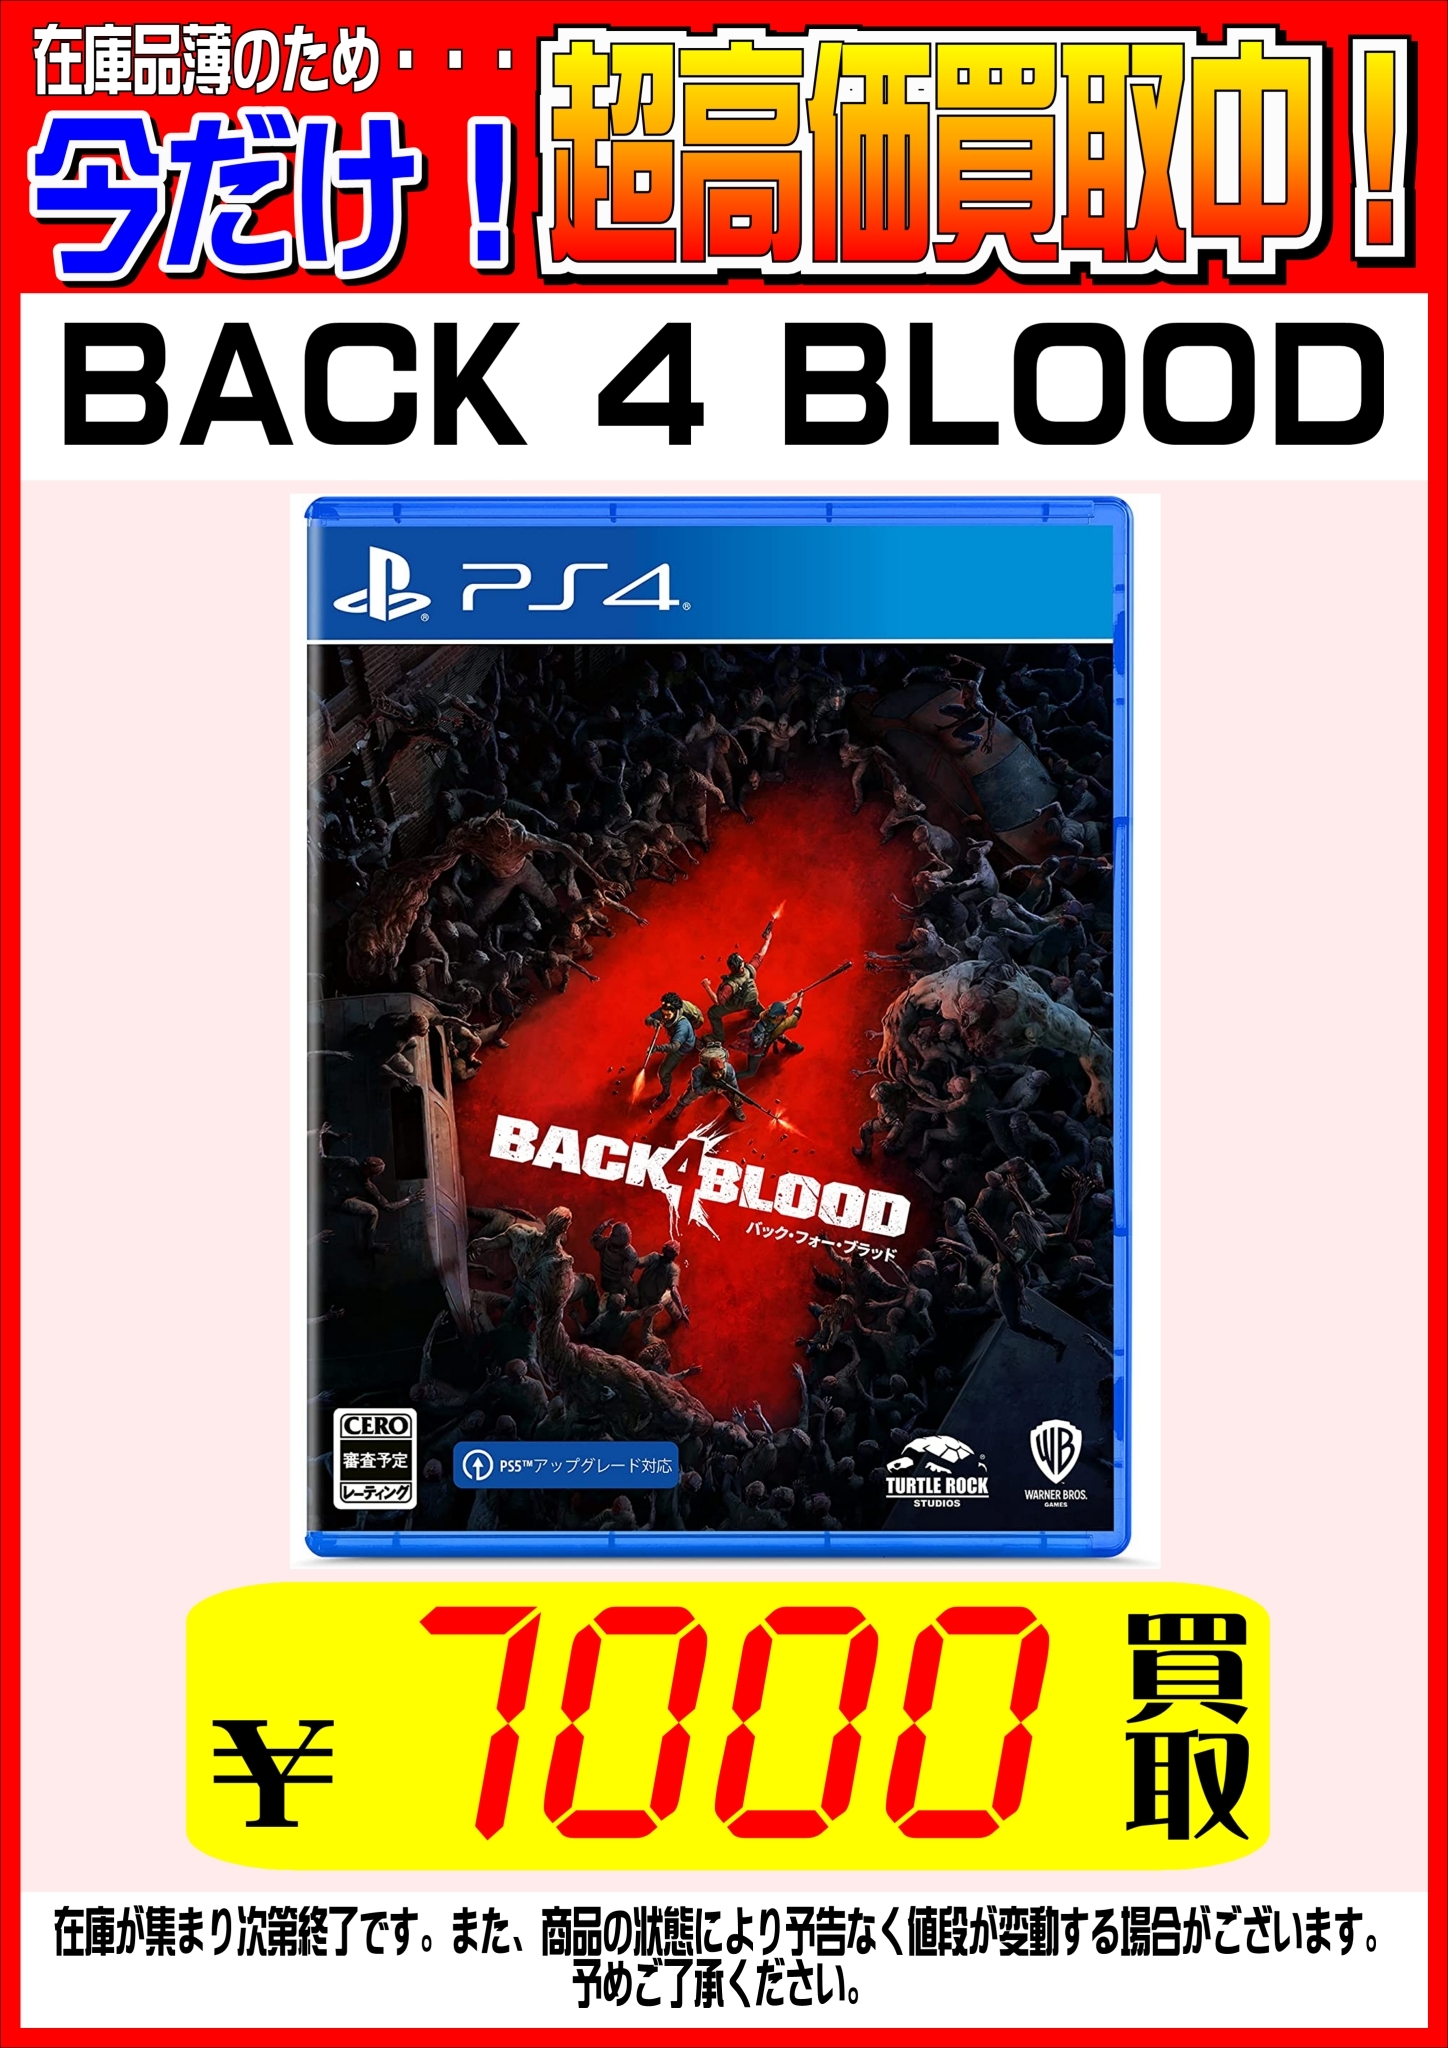 10/22☆〈Back 4 blood PS4ソフト〉超高価買取中です！☆ - 万代書店